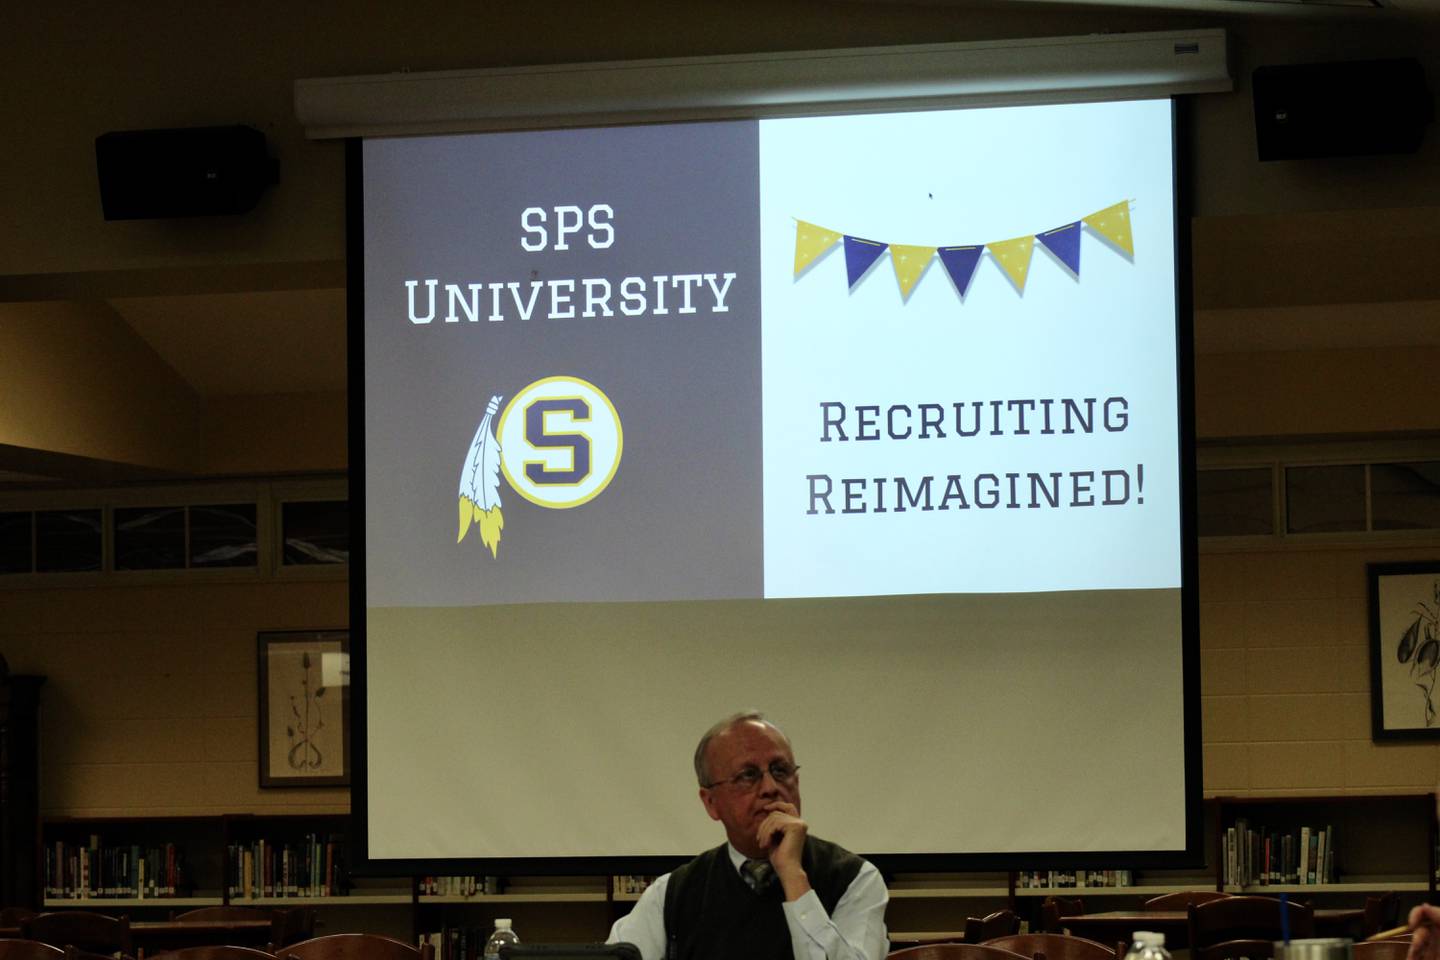 Narcisco Puentes, a member of the Sterling Public Schools board of education, listens to a presentation on SPS University on Wednesday, Jan. 25, 2023, at the Sterling High School library.